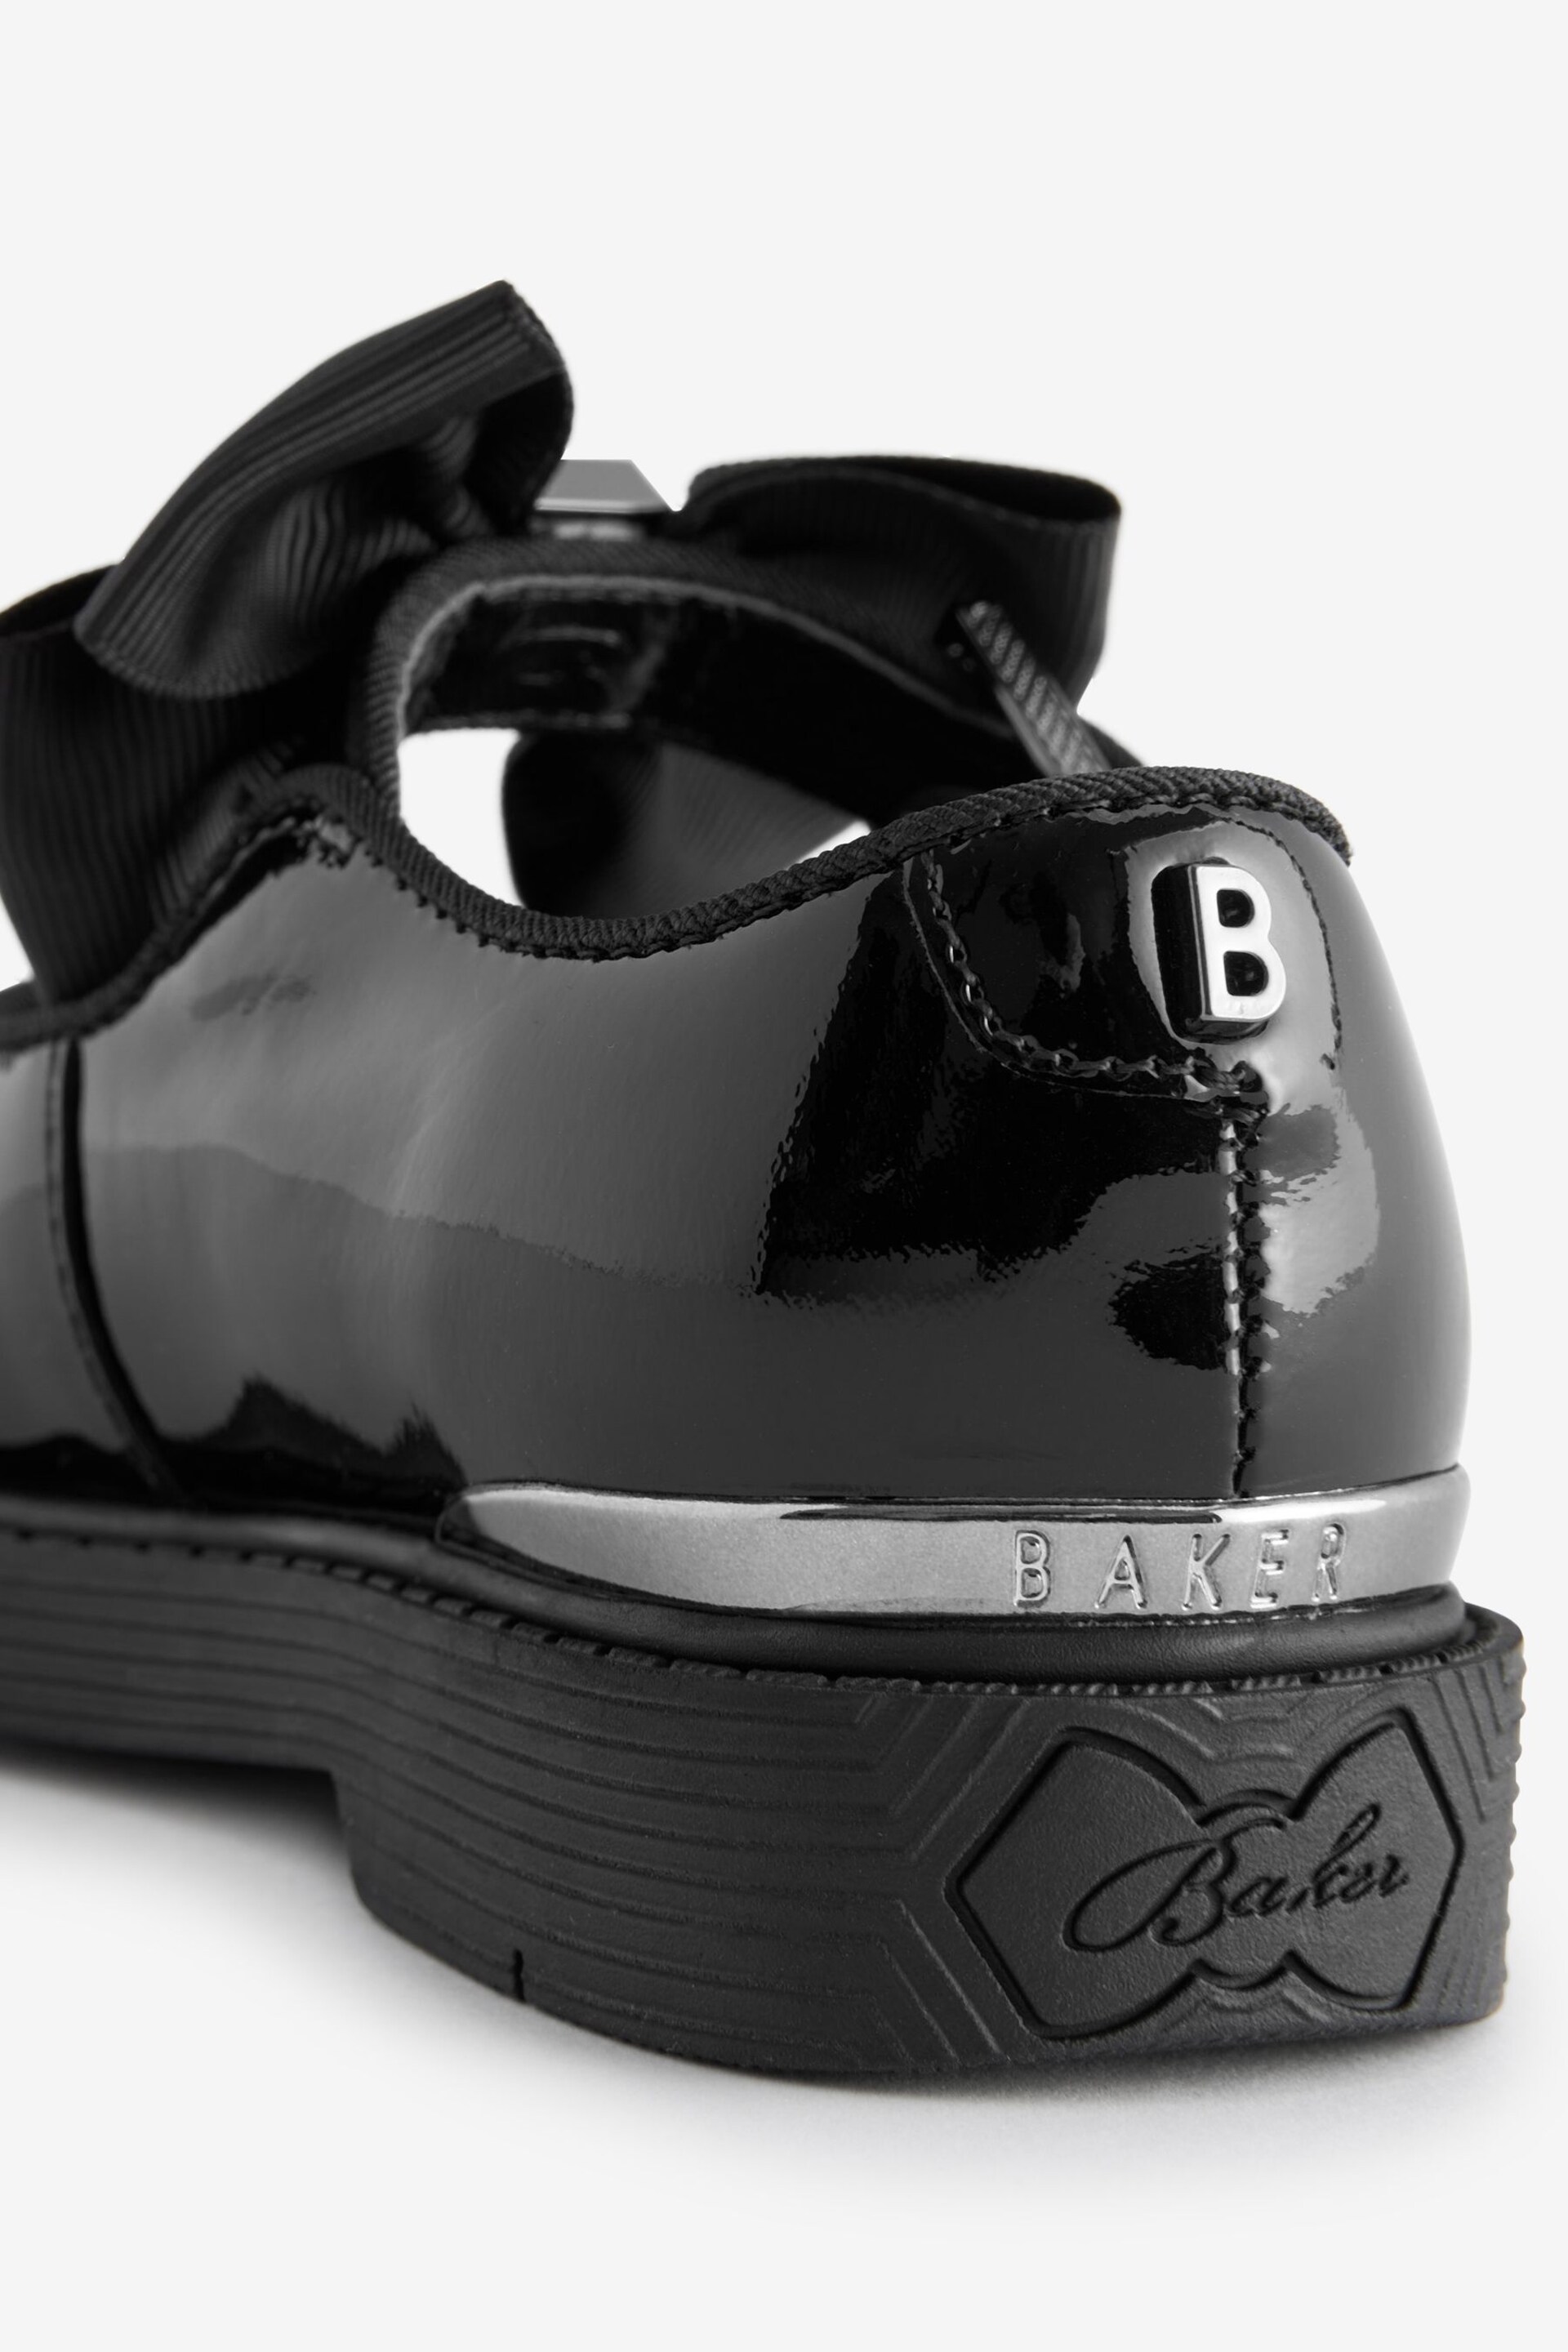 Baker by Ted Baker Girls Back to School Mary Jane Black Shoes with Bow - Image 6 of 6